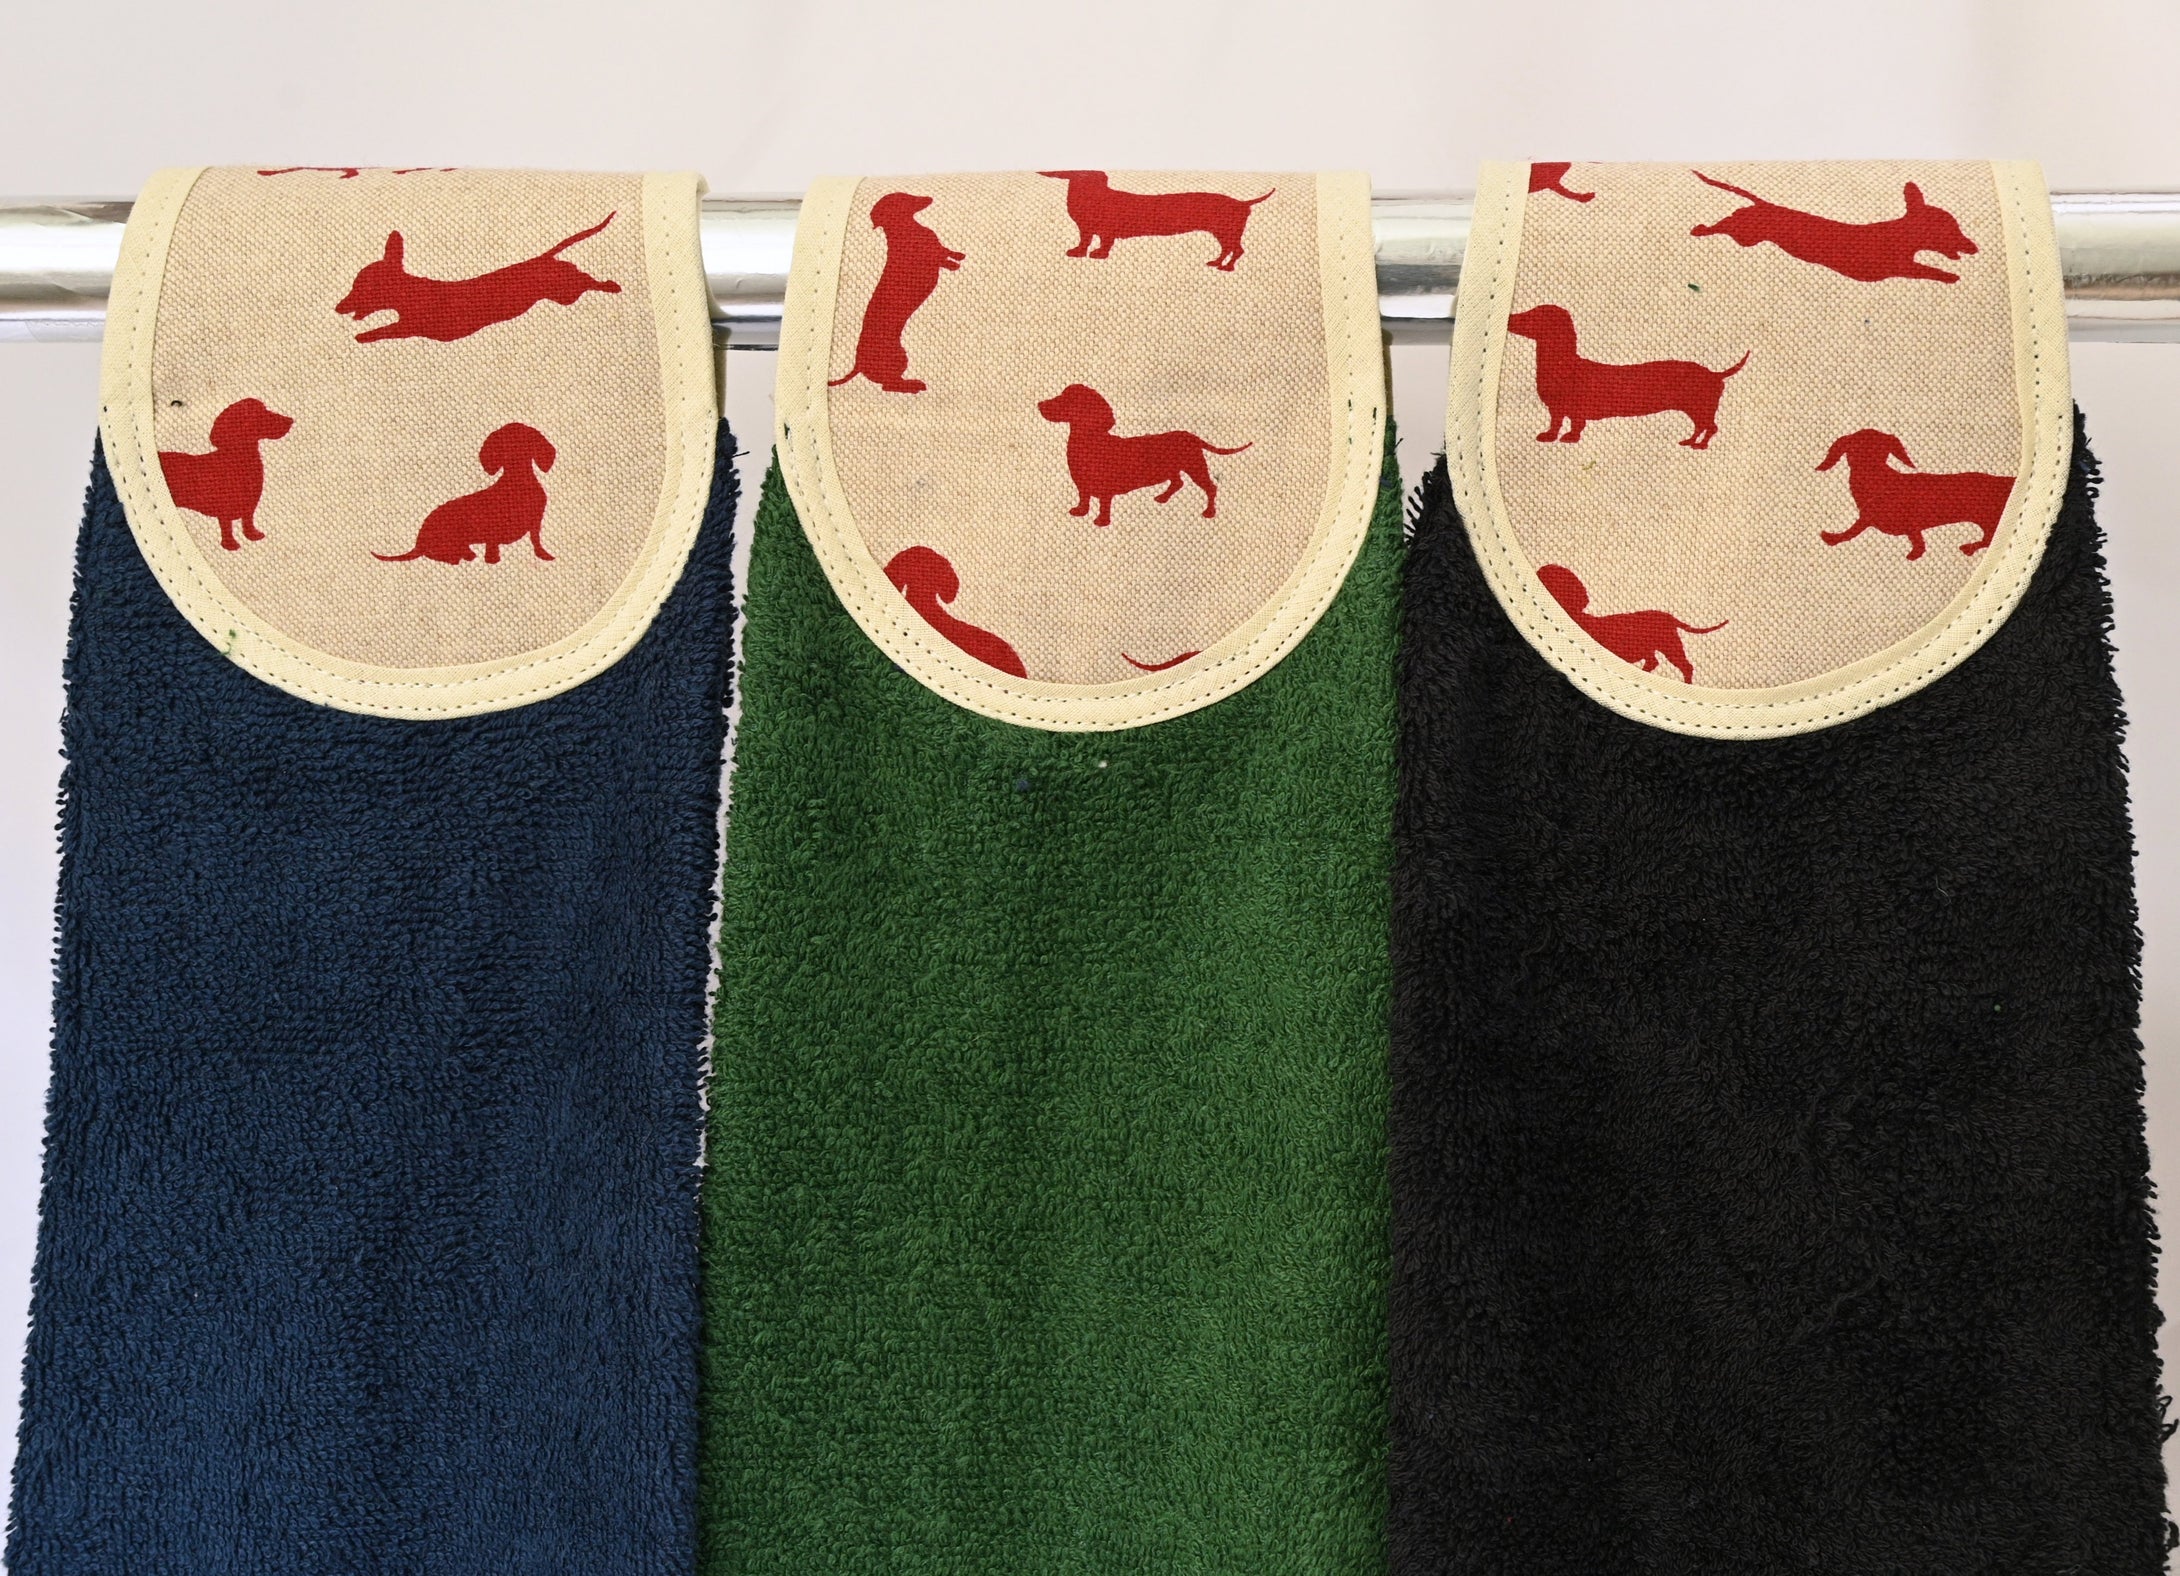 Hang ups, Kitchen towels, Red Dachshund on Black or Green Towel